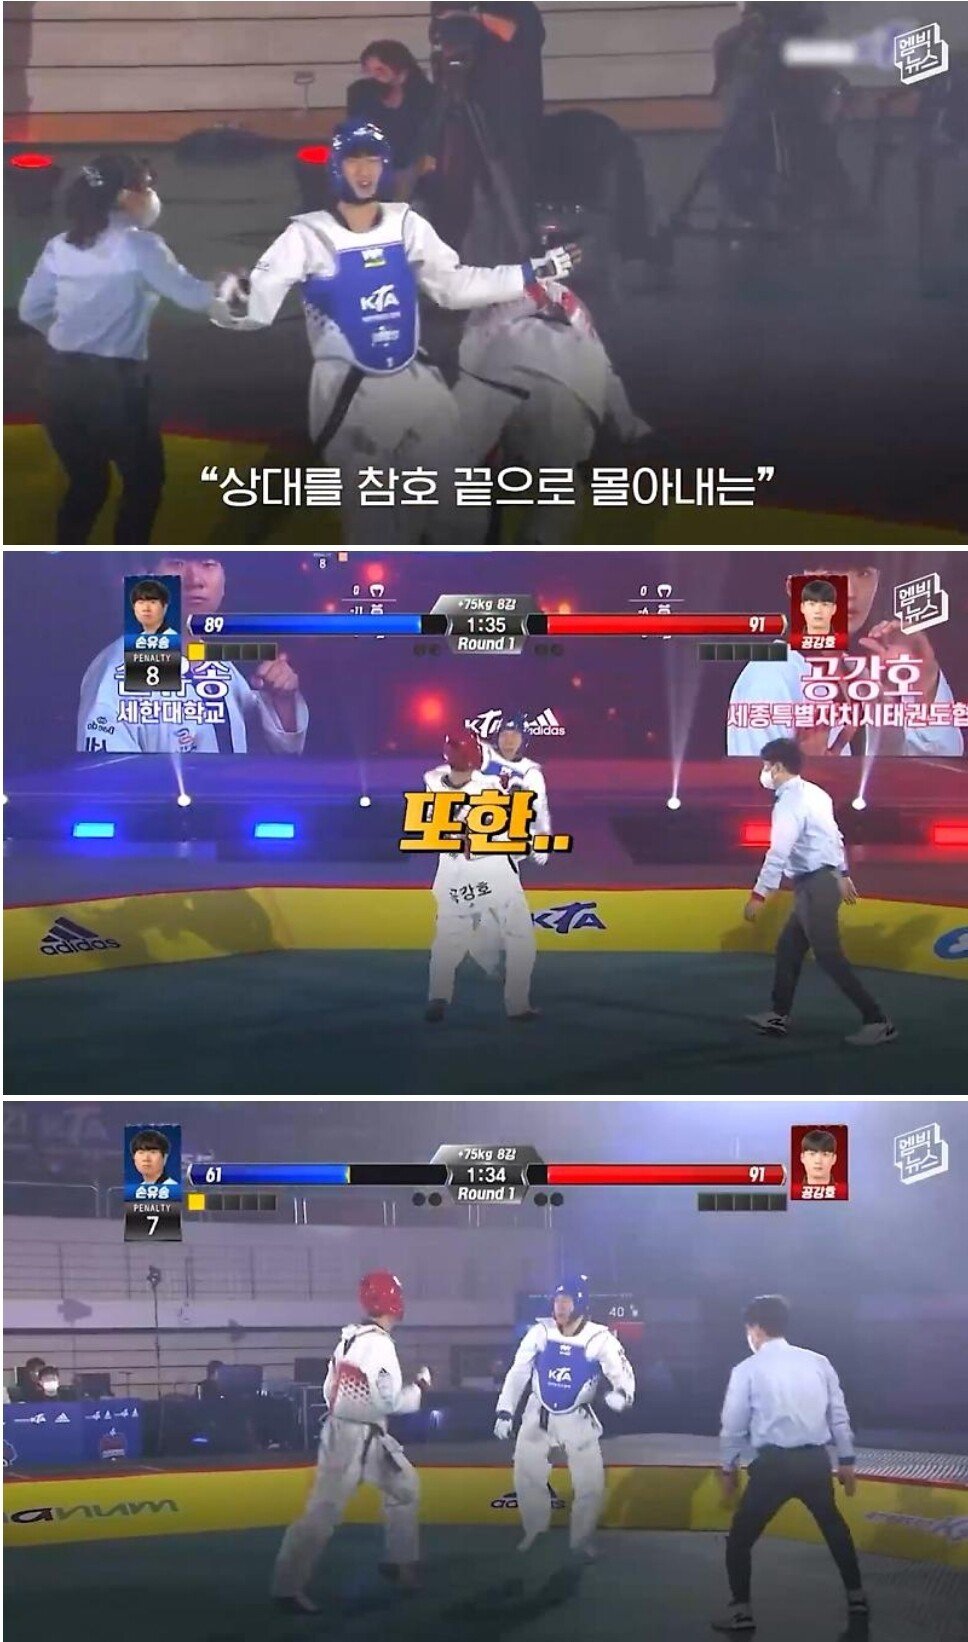 Taekwondo introduced a fighting game physical fitness system.